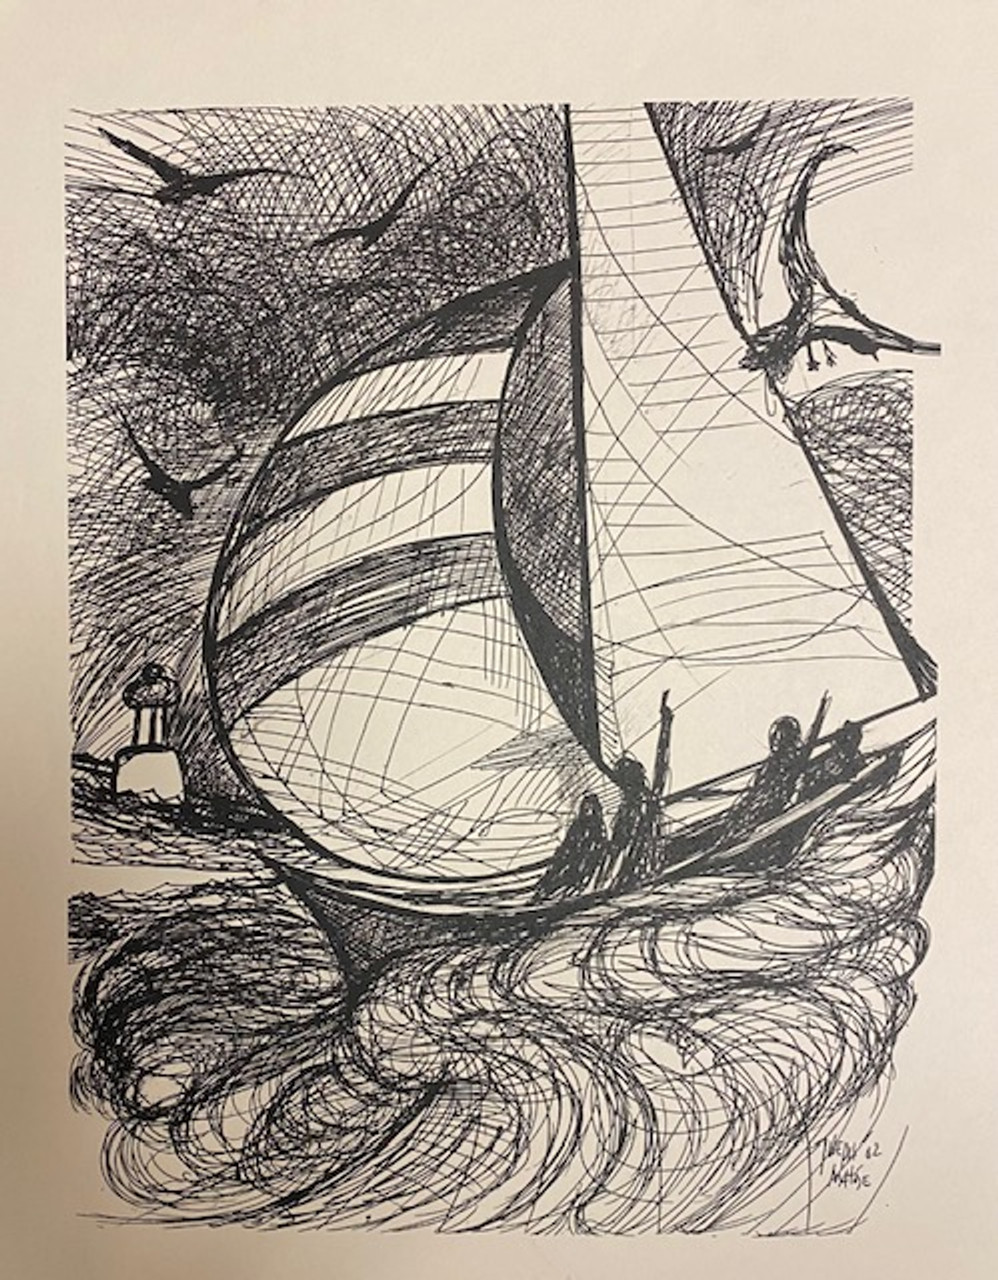 Sailboat on rough waters sketch by Joseph Matose 8"x 11"